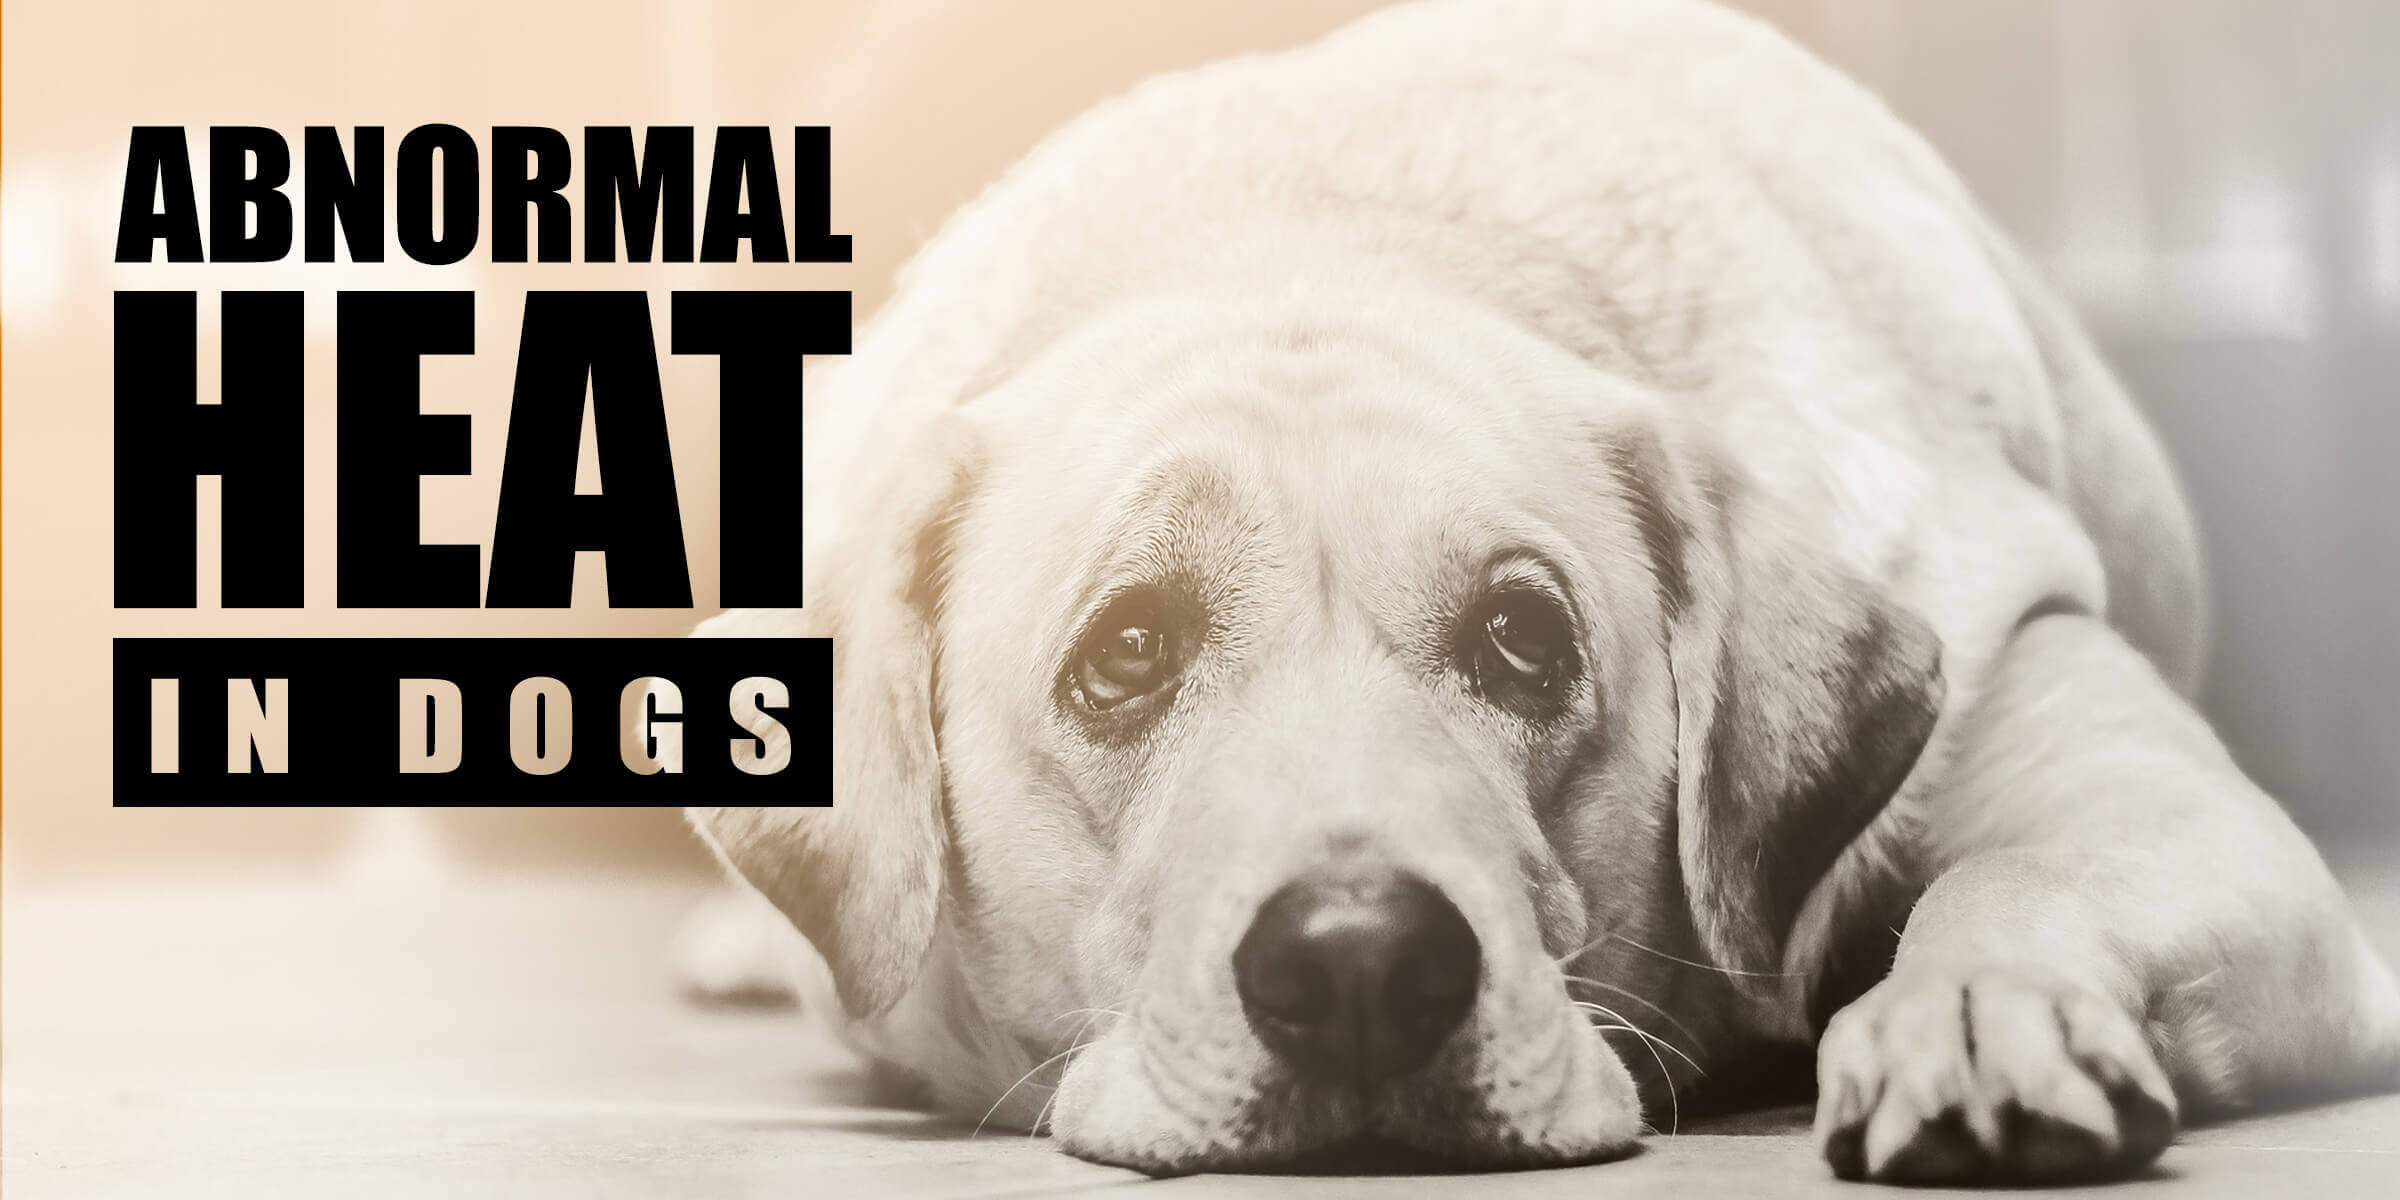 silent heat in dogs and abnormalities